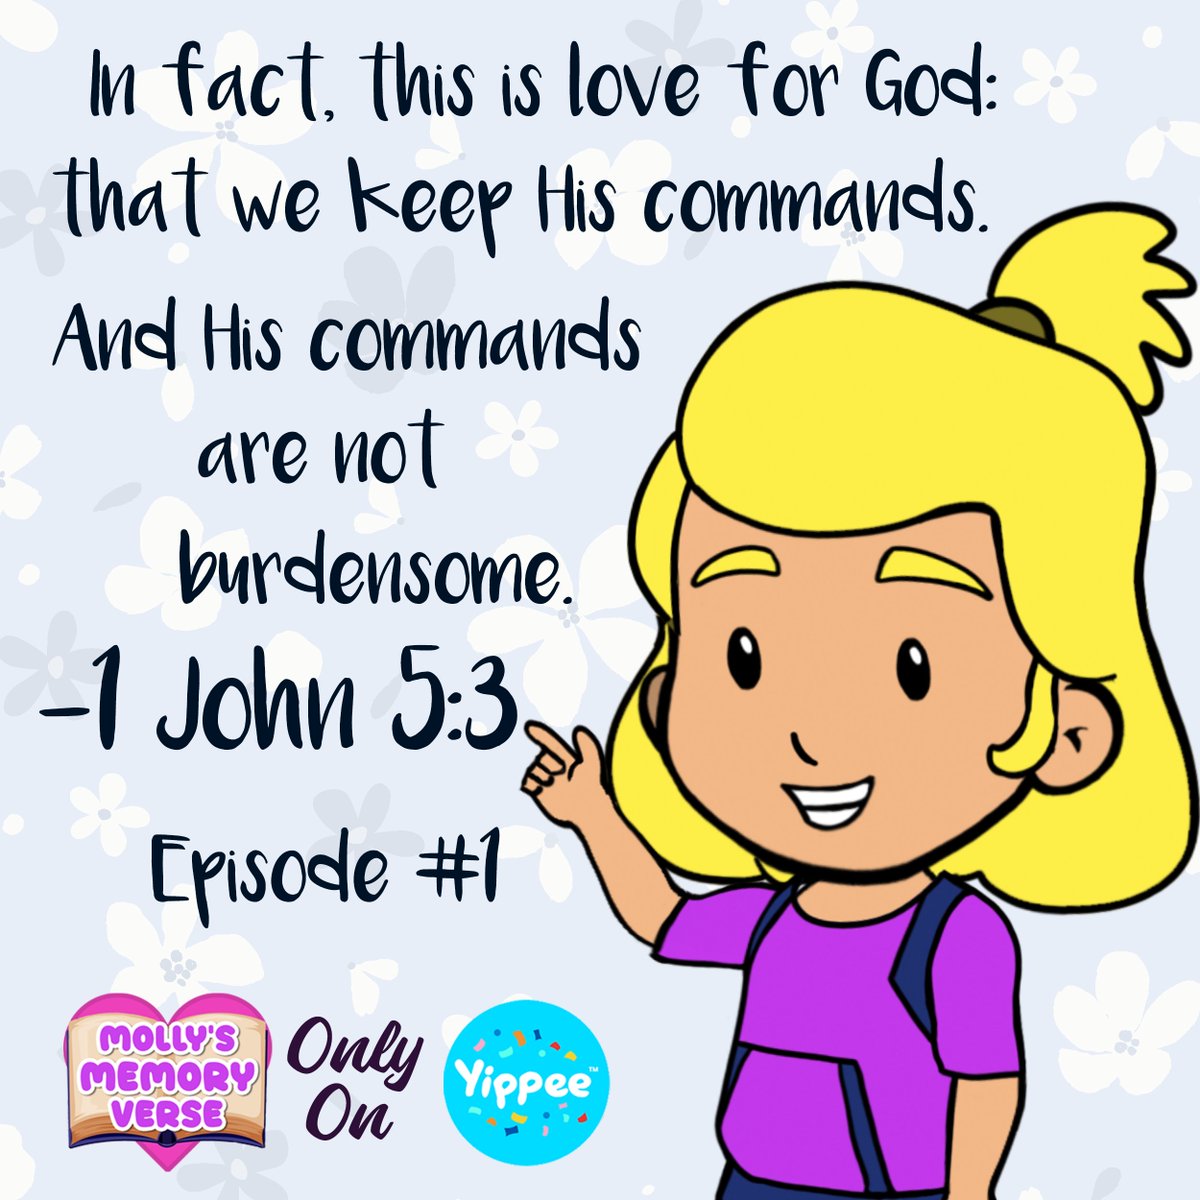 1 John 5:3 'In fact, this is love for God: that we keep His commands. And his commands are not burdensome.' (Episode #1) Want to learn Scripture with your kids? Watch 'Molly's Memory Verse' on @YippeeTV!